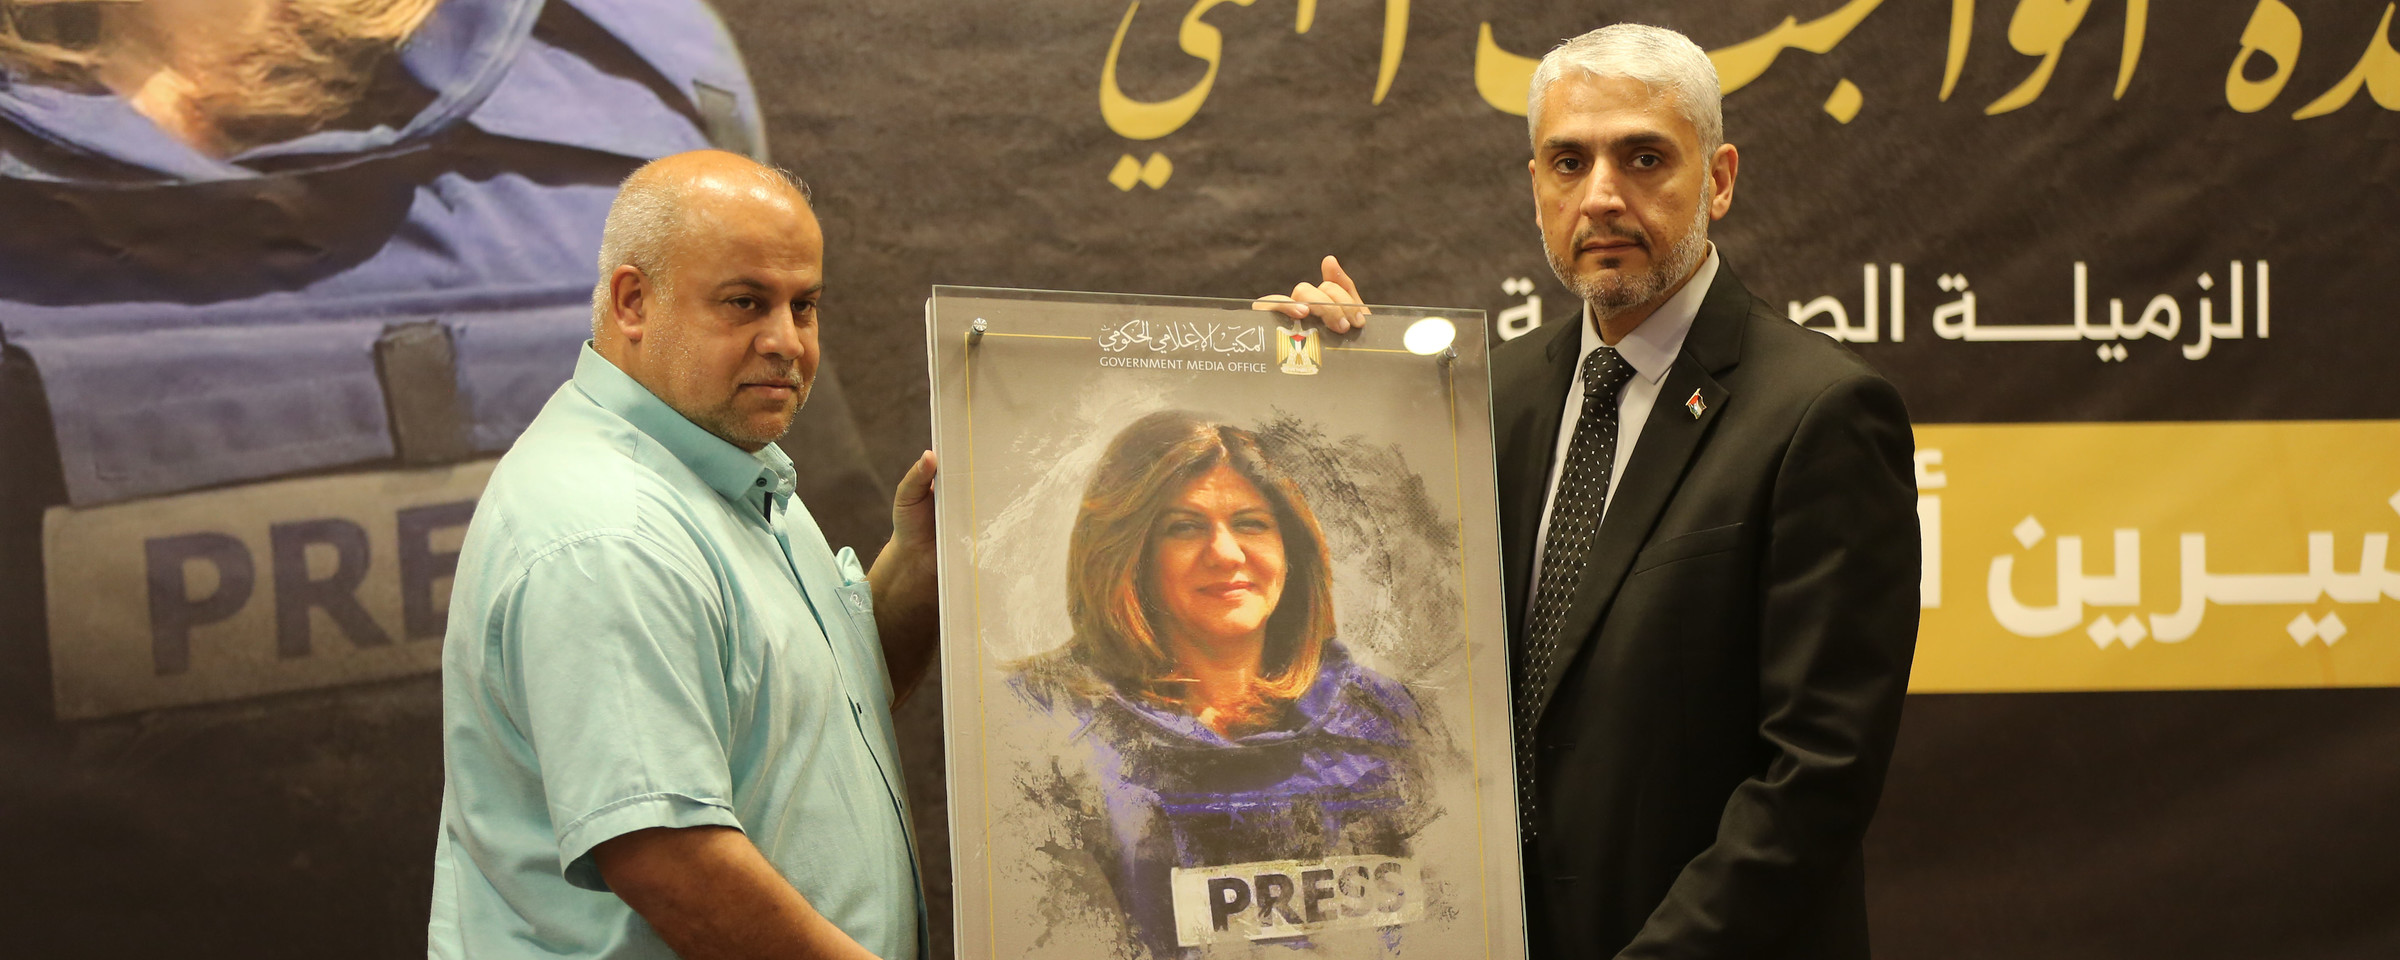 Two men hold framed picture of Shireen Abu Akleh while standing on stage